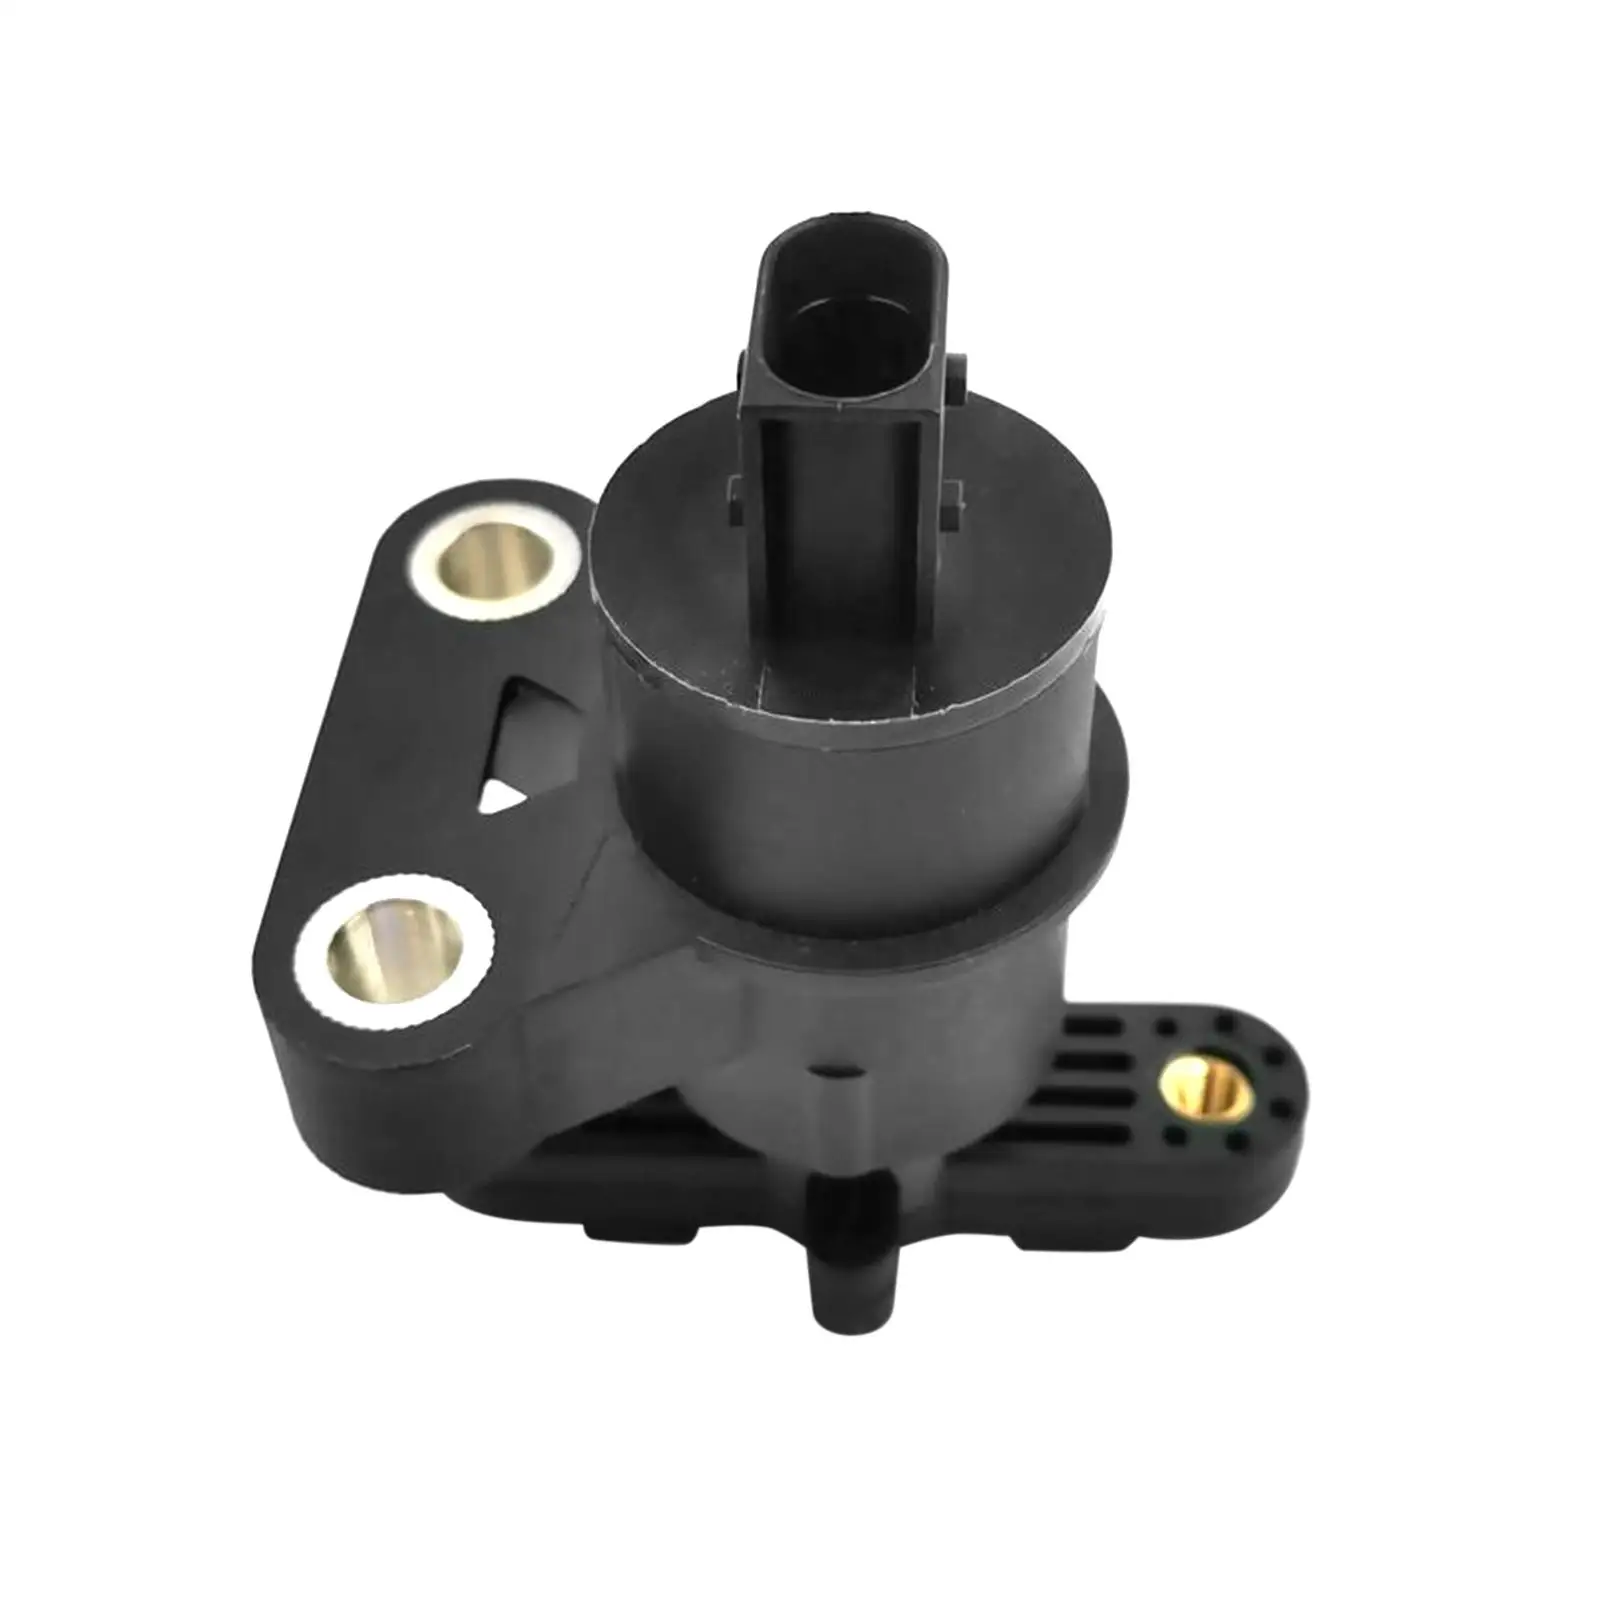 Air Suspension Height Level Sensor 4410502010 Fittings Easily Install High Performance Replace Parts for Scania Truck S4 S5